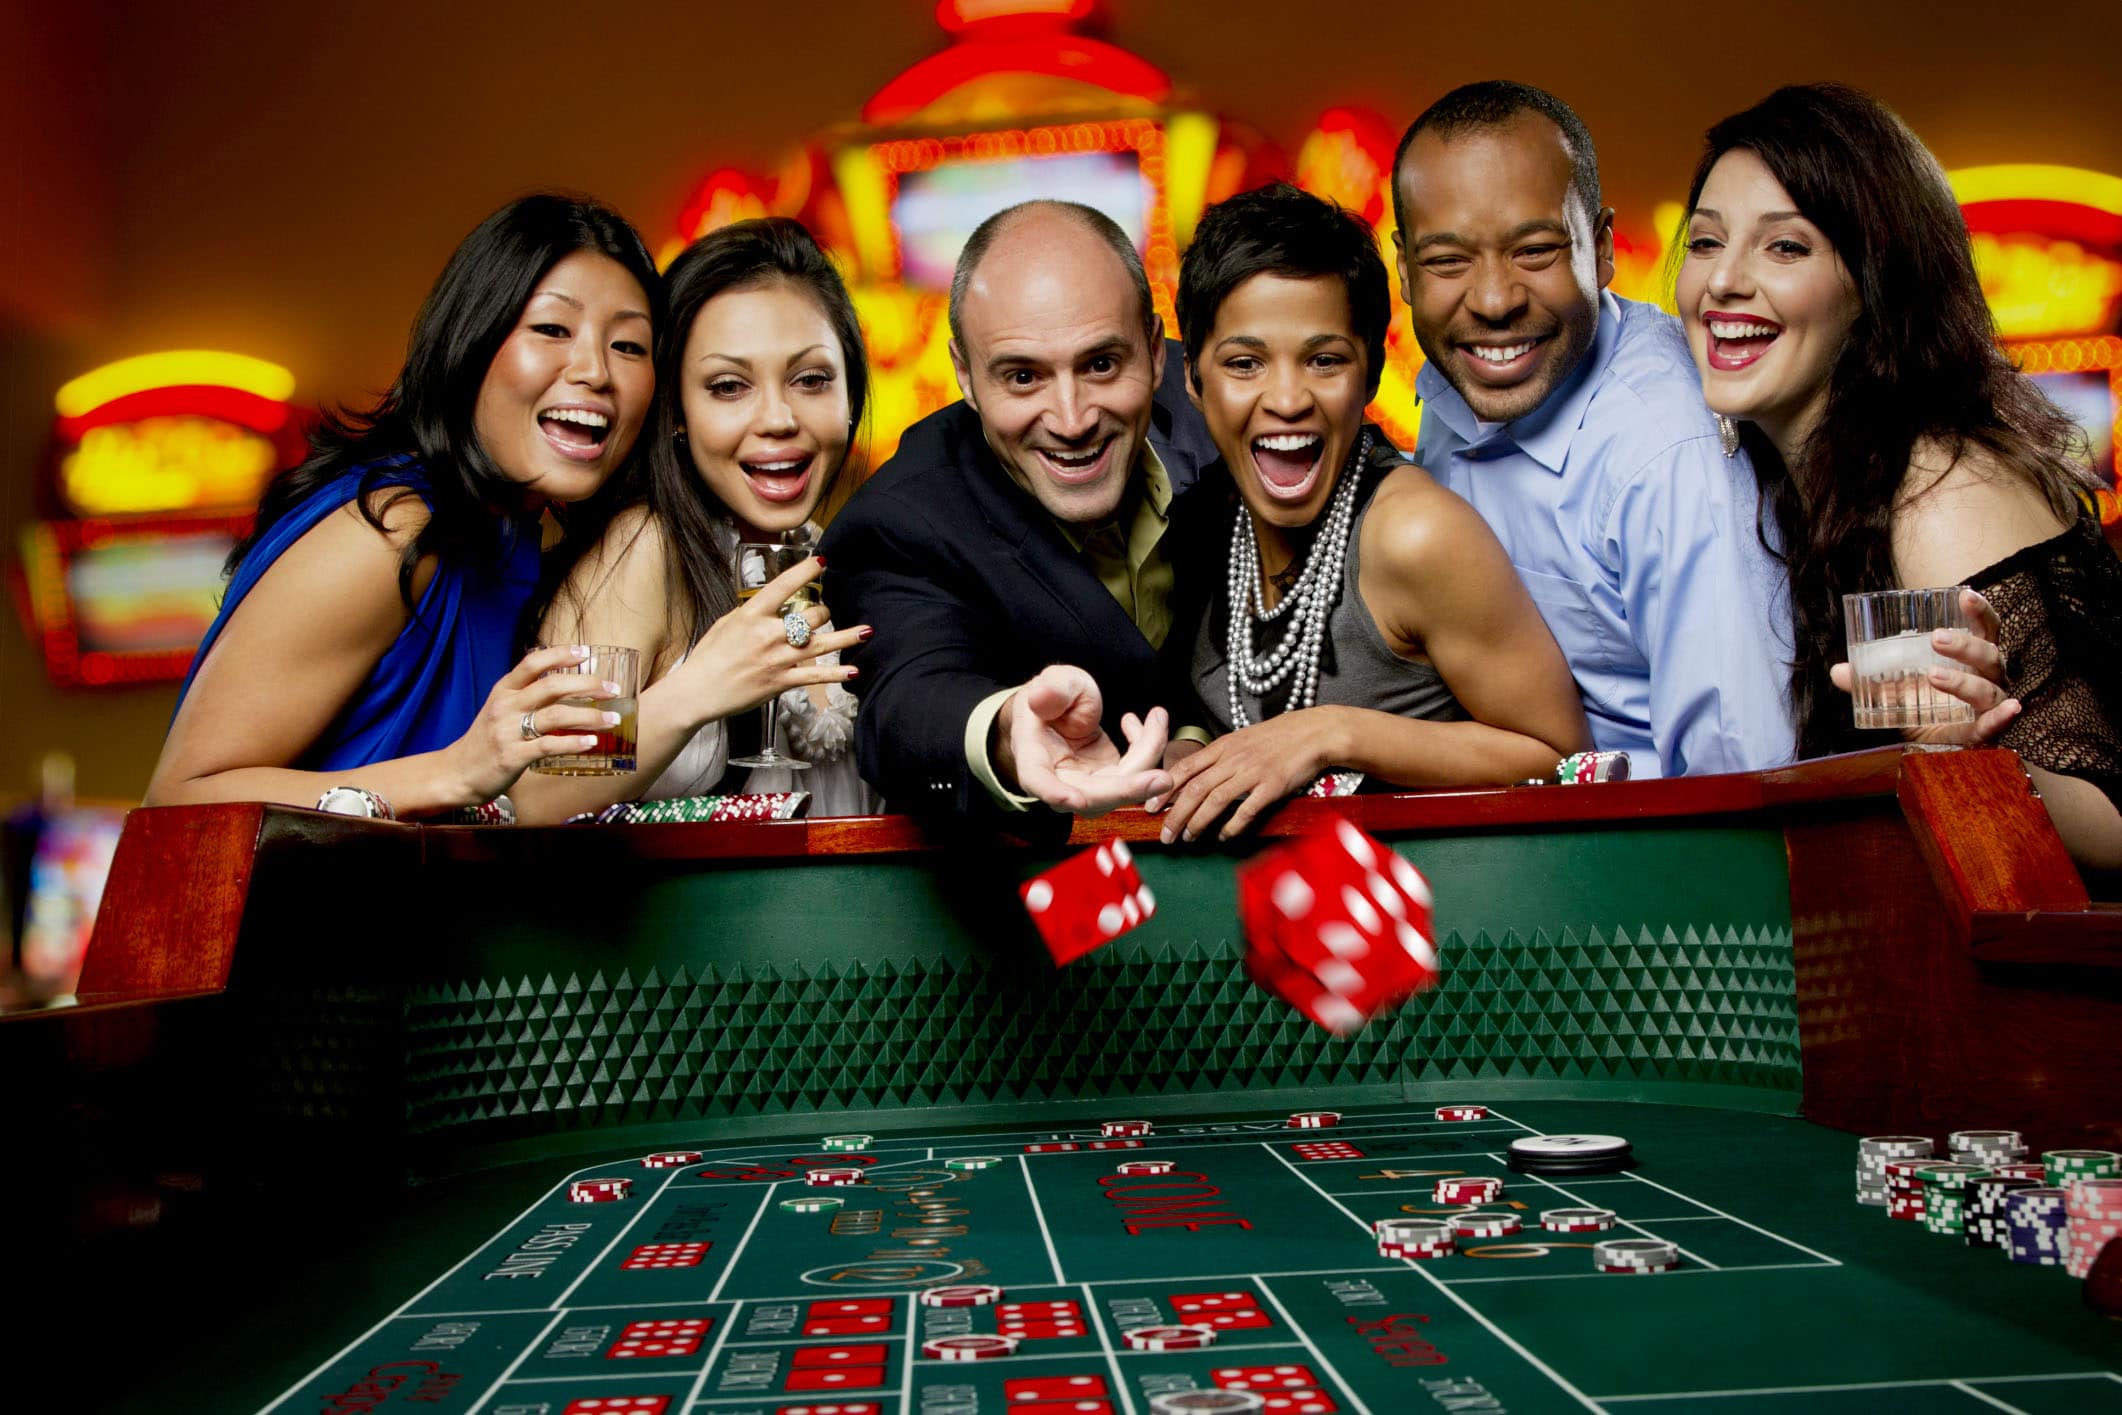 Did You Start casinos For Passion or Money?